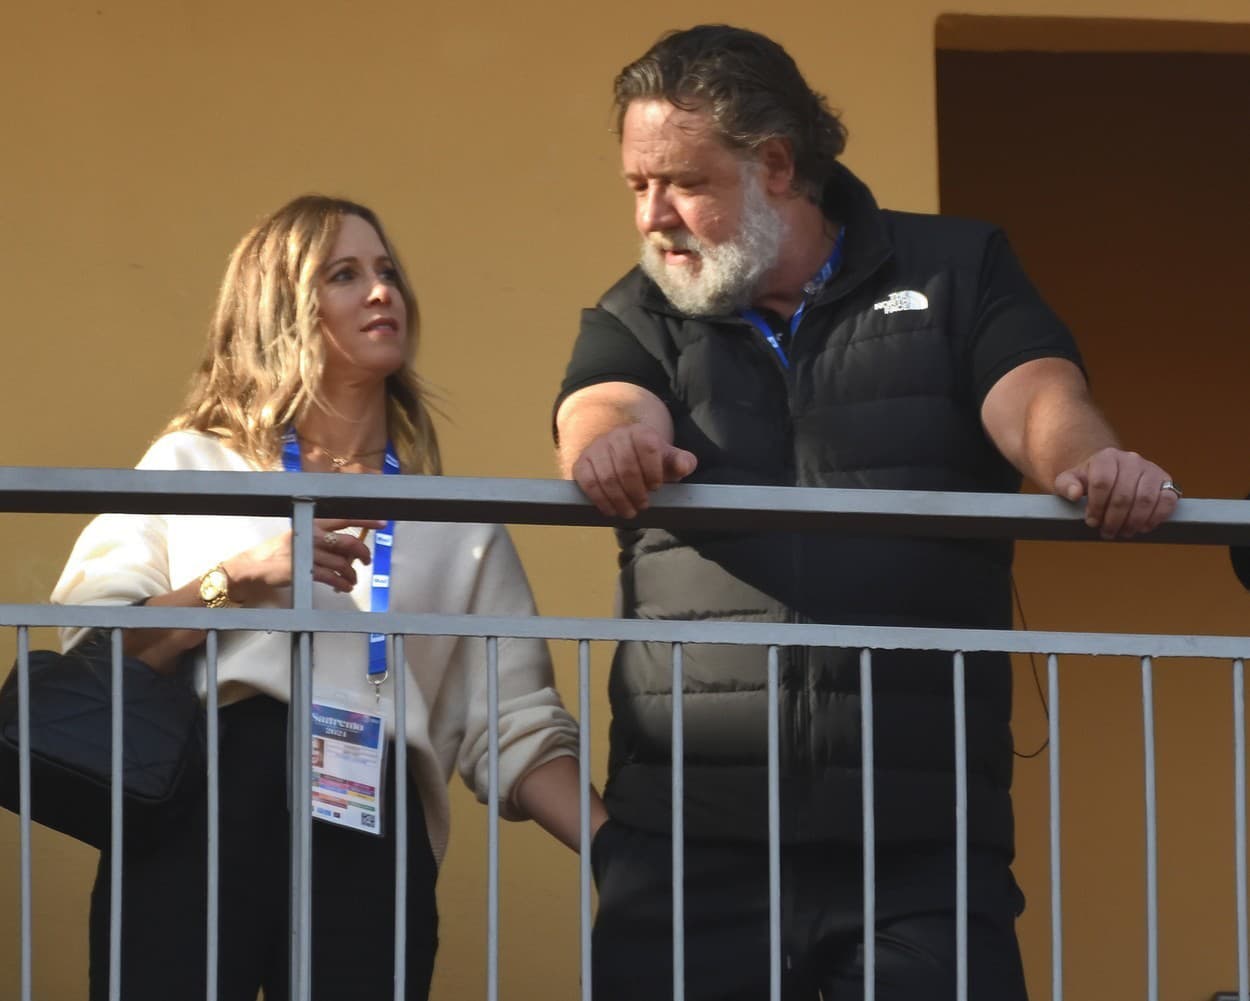 Britney Theriot a Russell Crowe